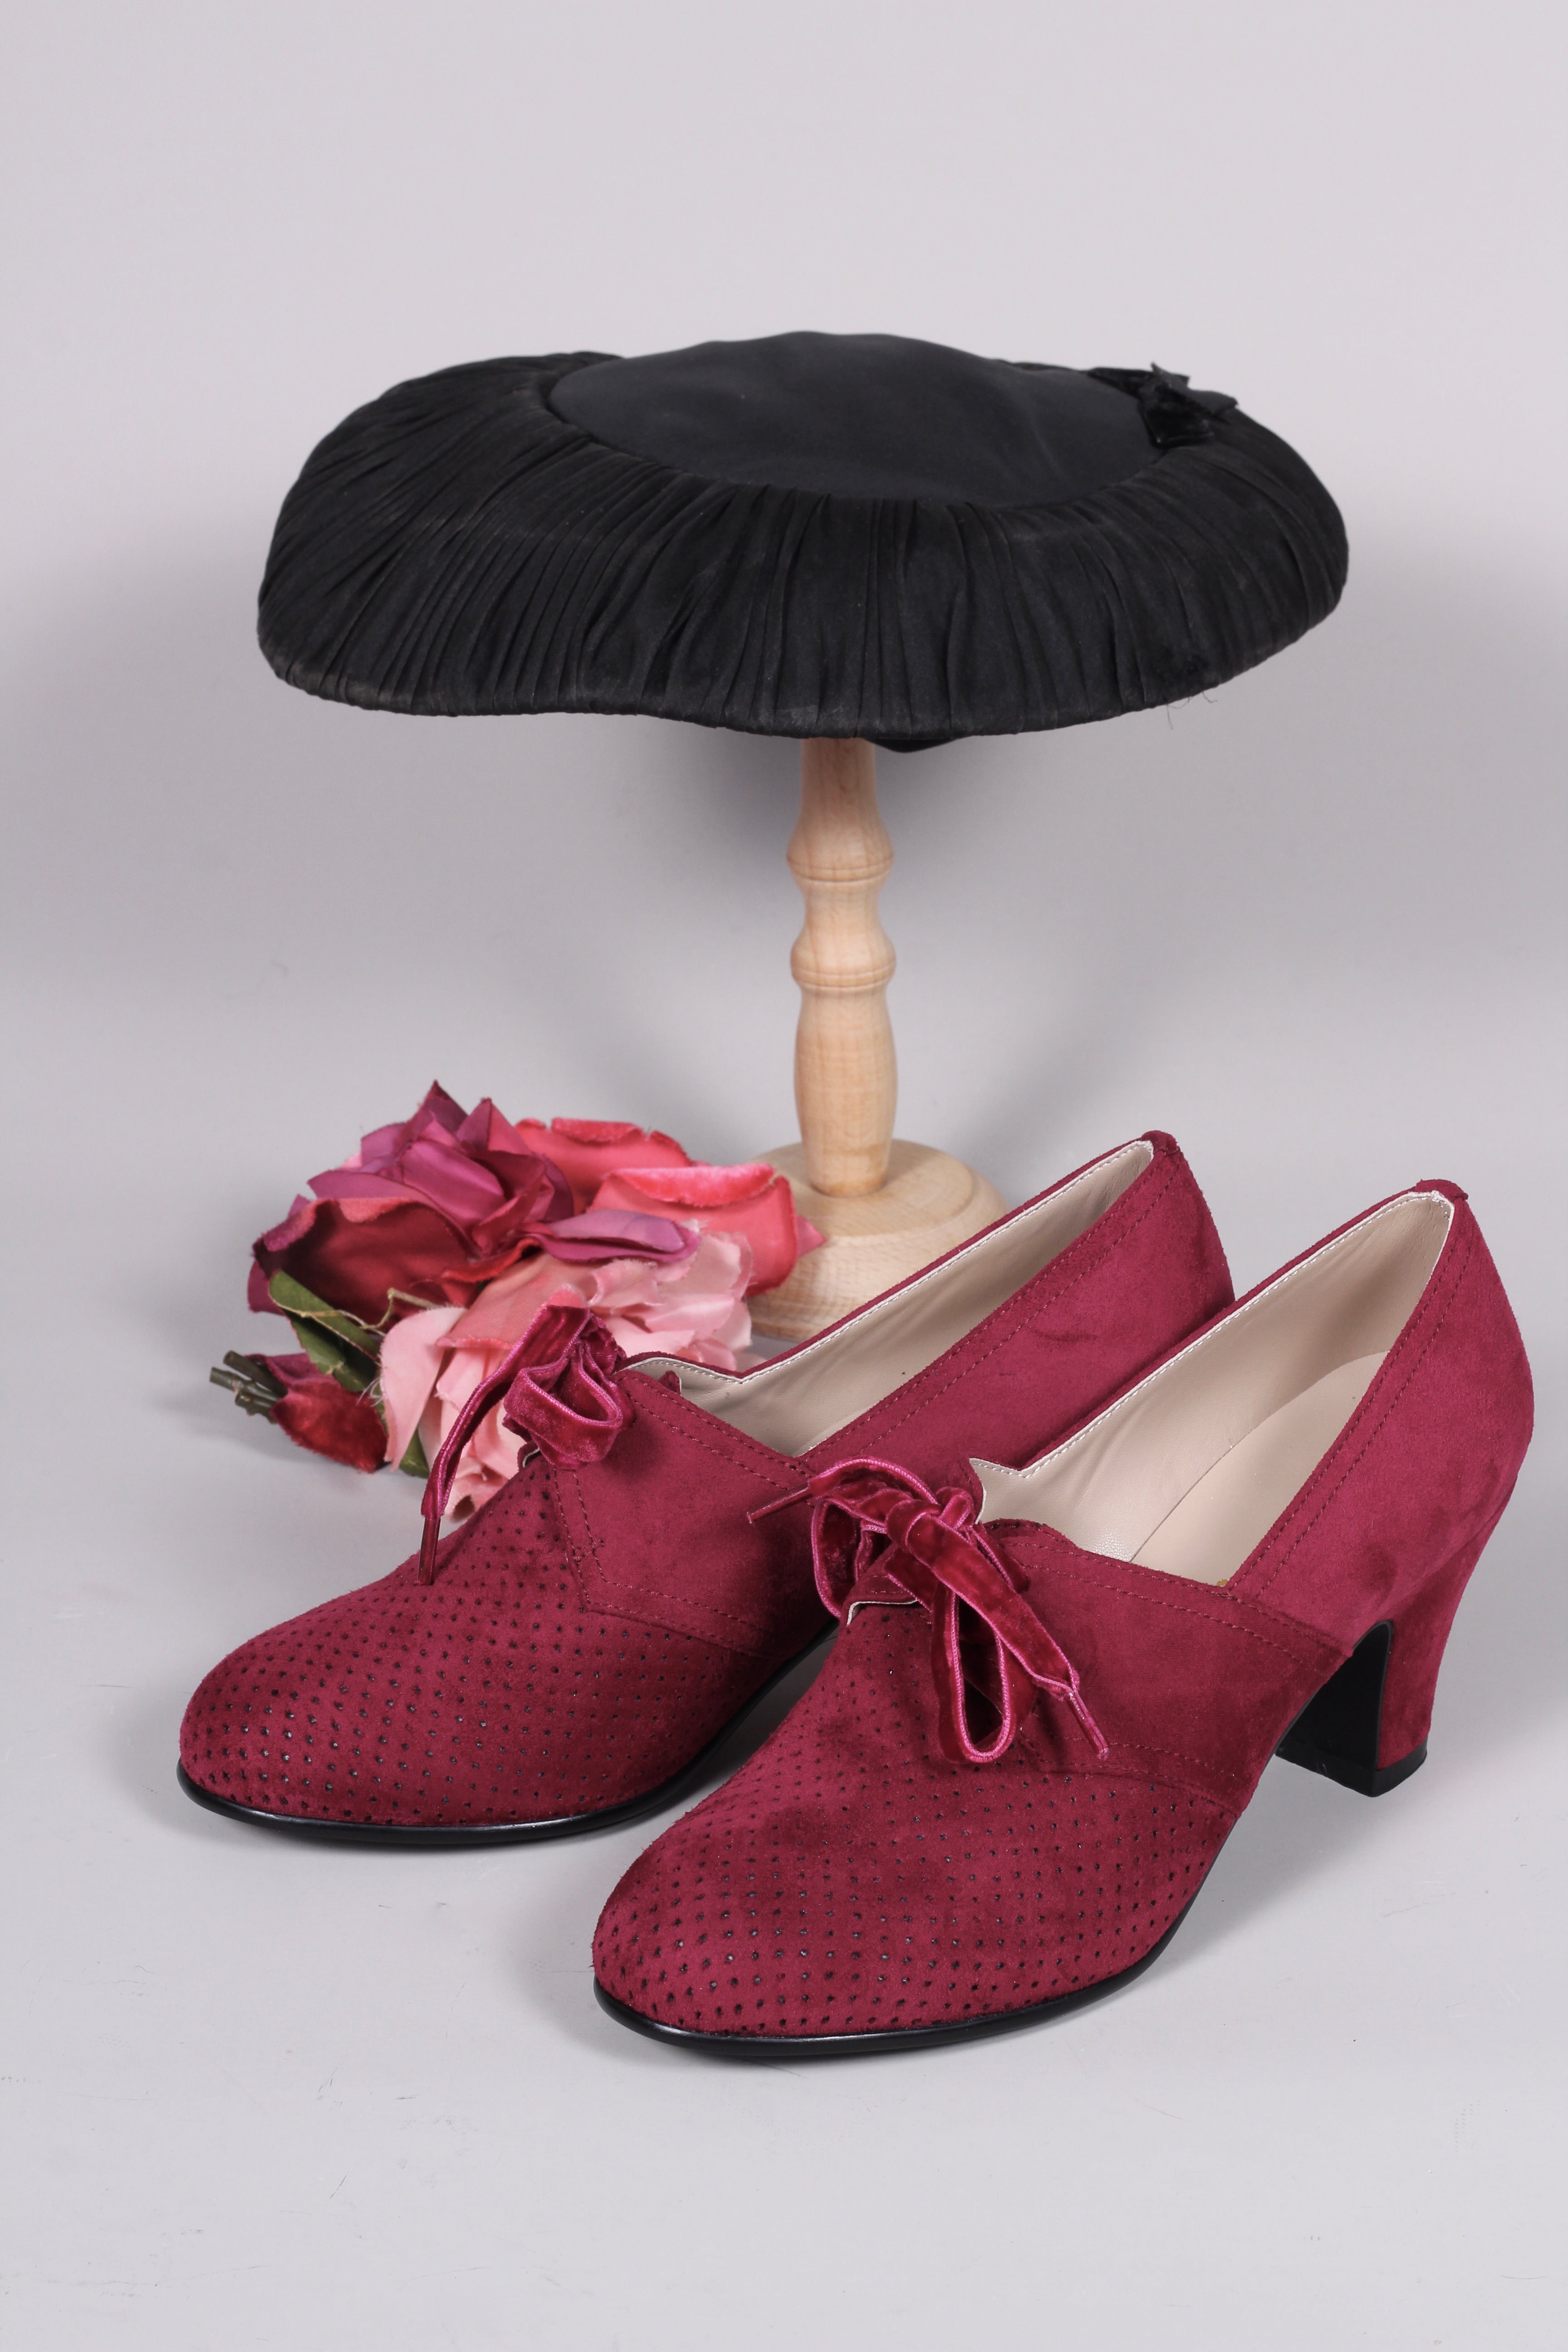 Vintage Inspired Shoe Styles from Hotter Shoes